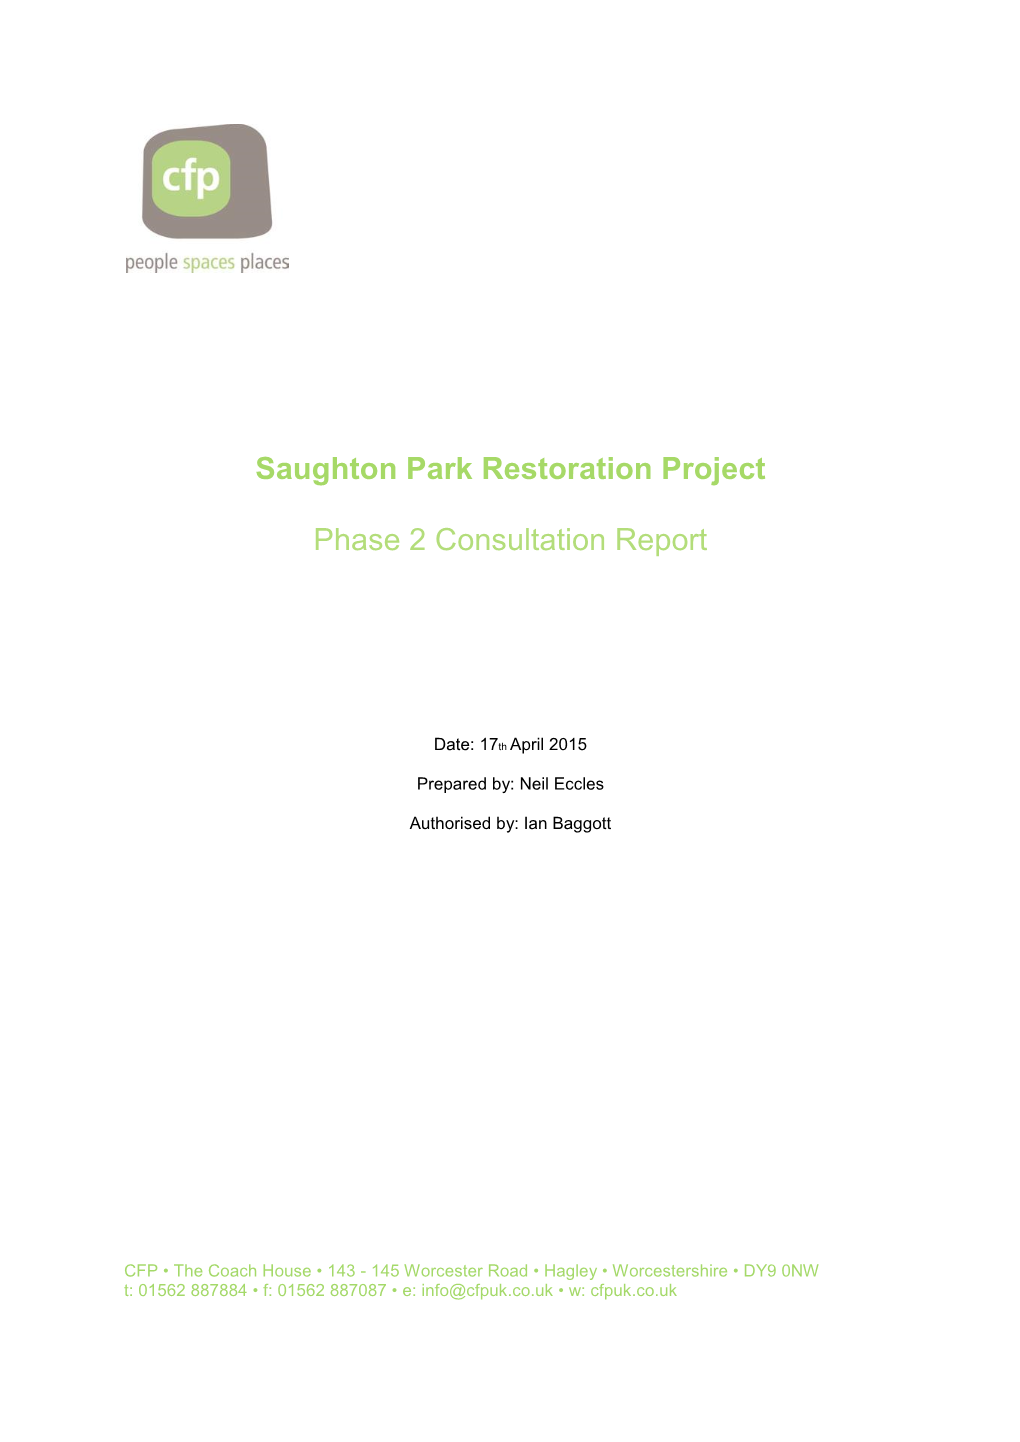 Saughton Park Restoration Project Phase 2 Consultation Report